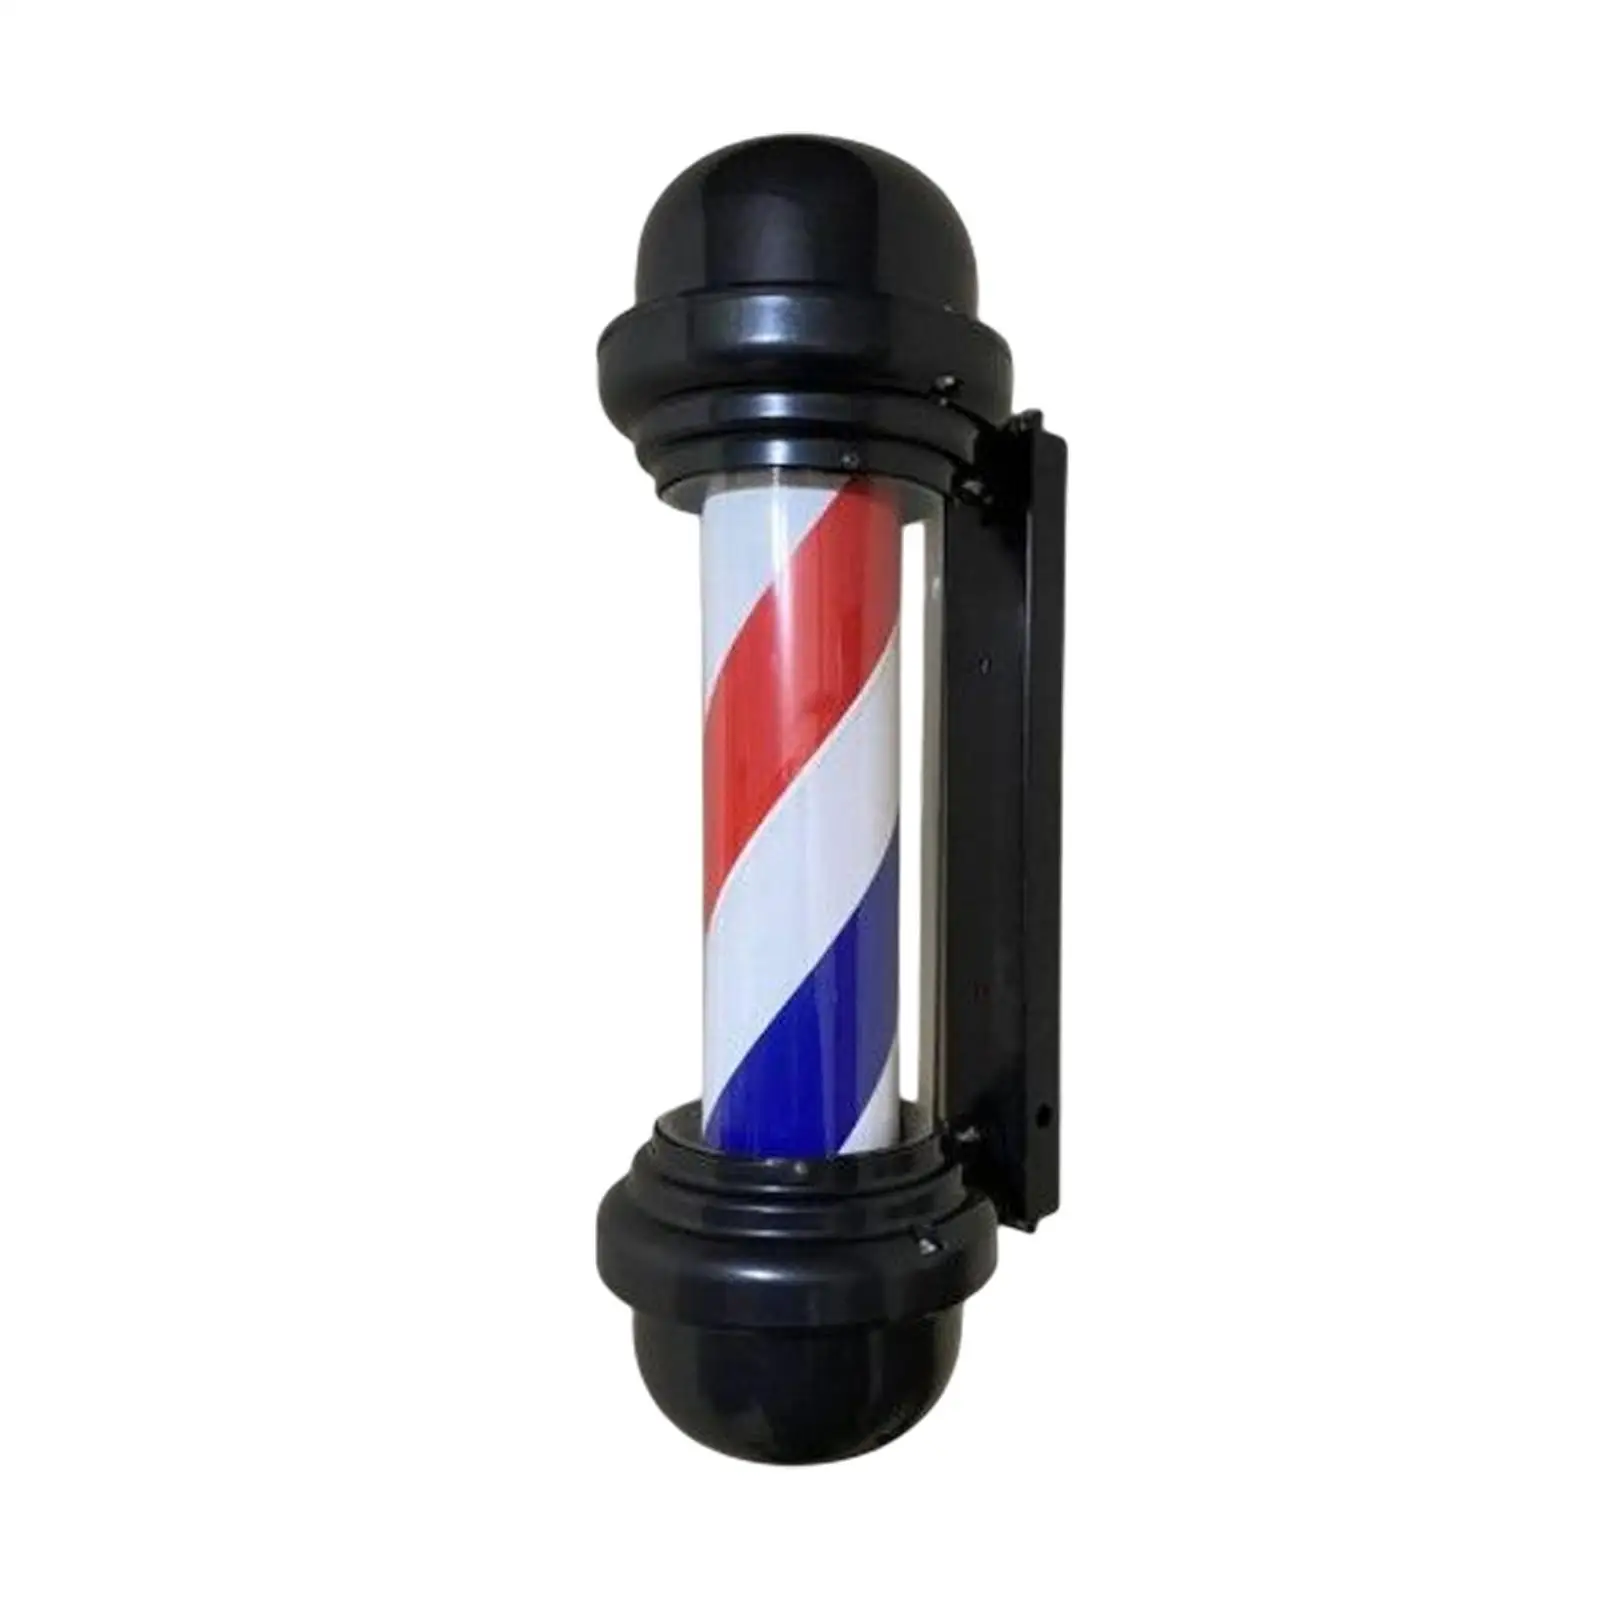 Barber Shop Pole Light Rotating Sign Light Wall Hanging Windproof Hair Salon Shop Classic Lamp Vintage Style for Indoor